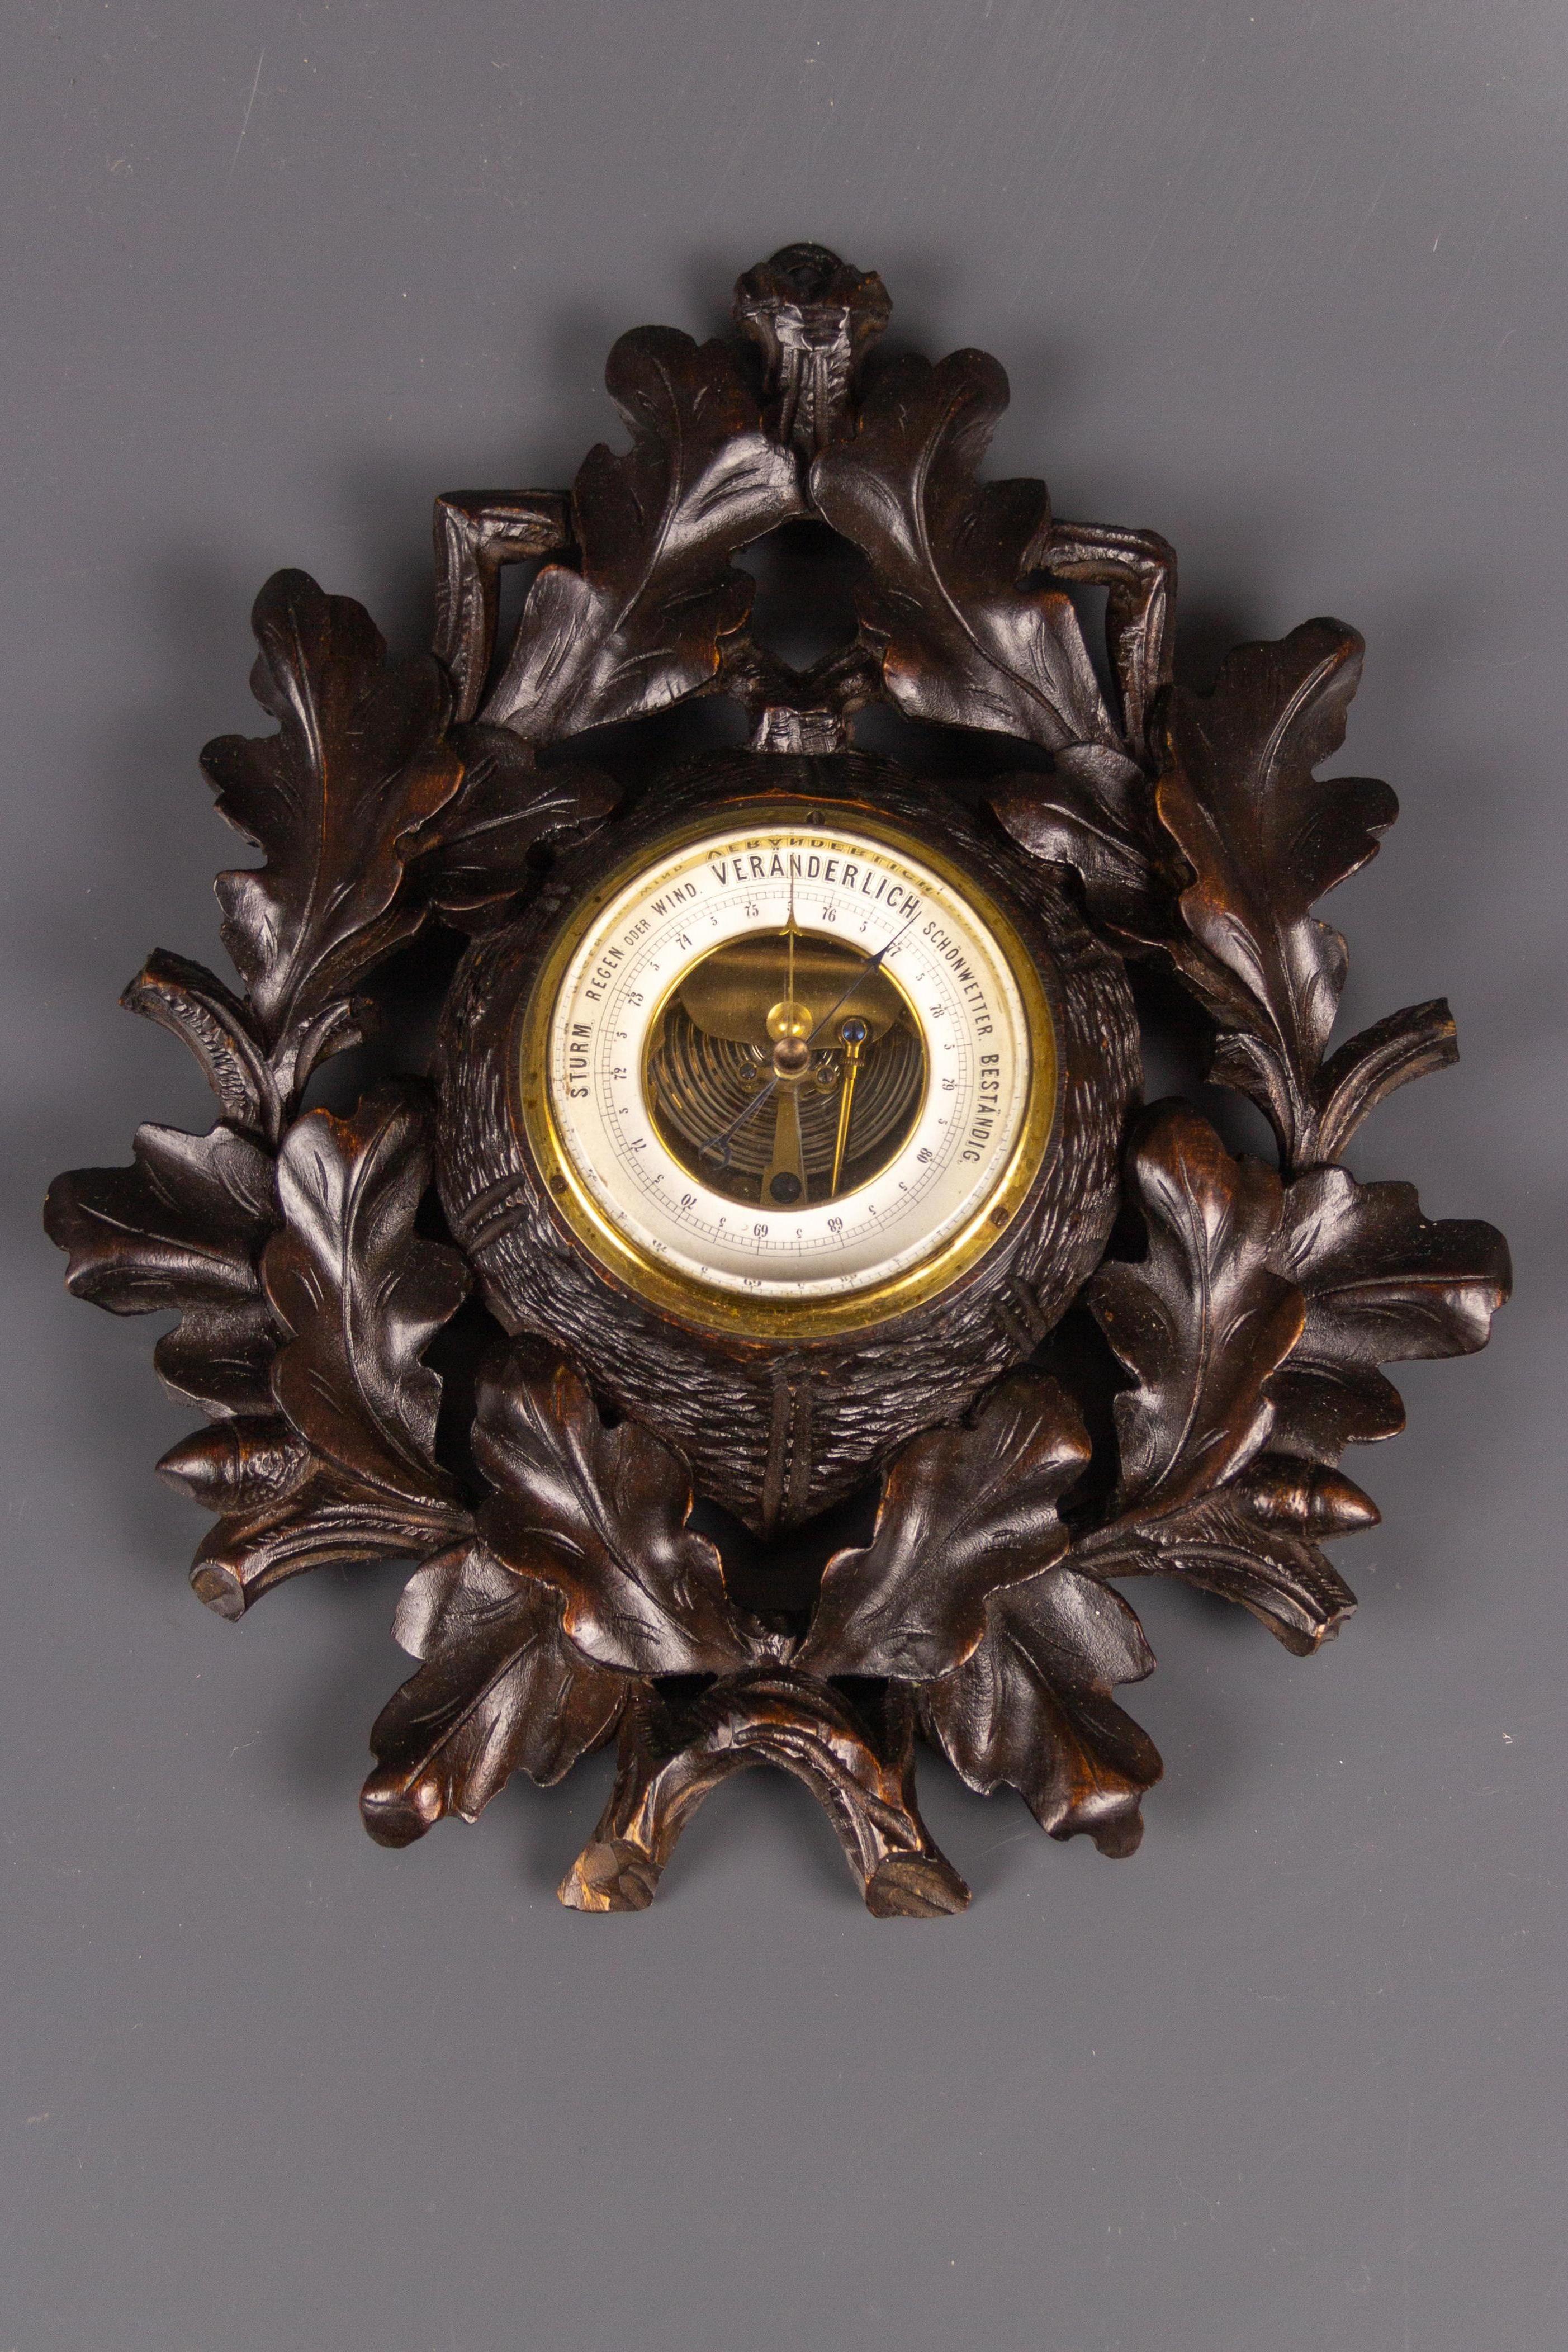 German Black Forest style barometer with fine hand-carved oak branches, leaves, and acorns.
Dimensions: height 30 cm / 11.81 in; width 24 cm / 9.44 in; depth 5 cm / 1.96 in.
In good condition with slight signs of aging.